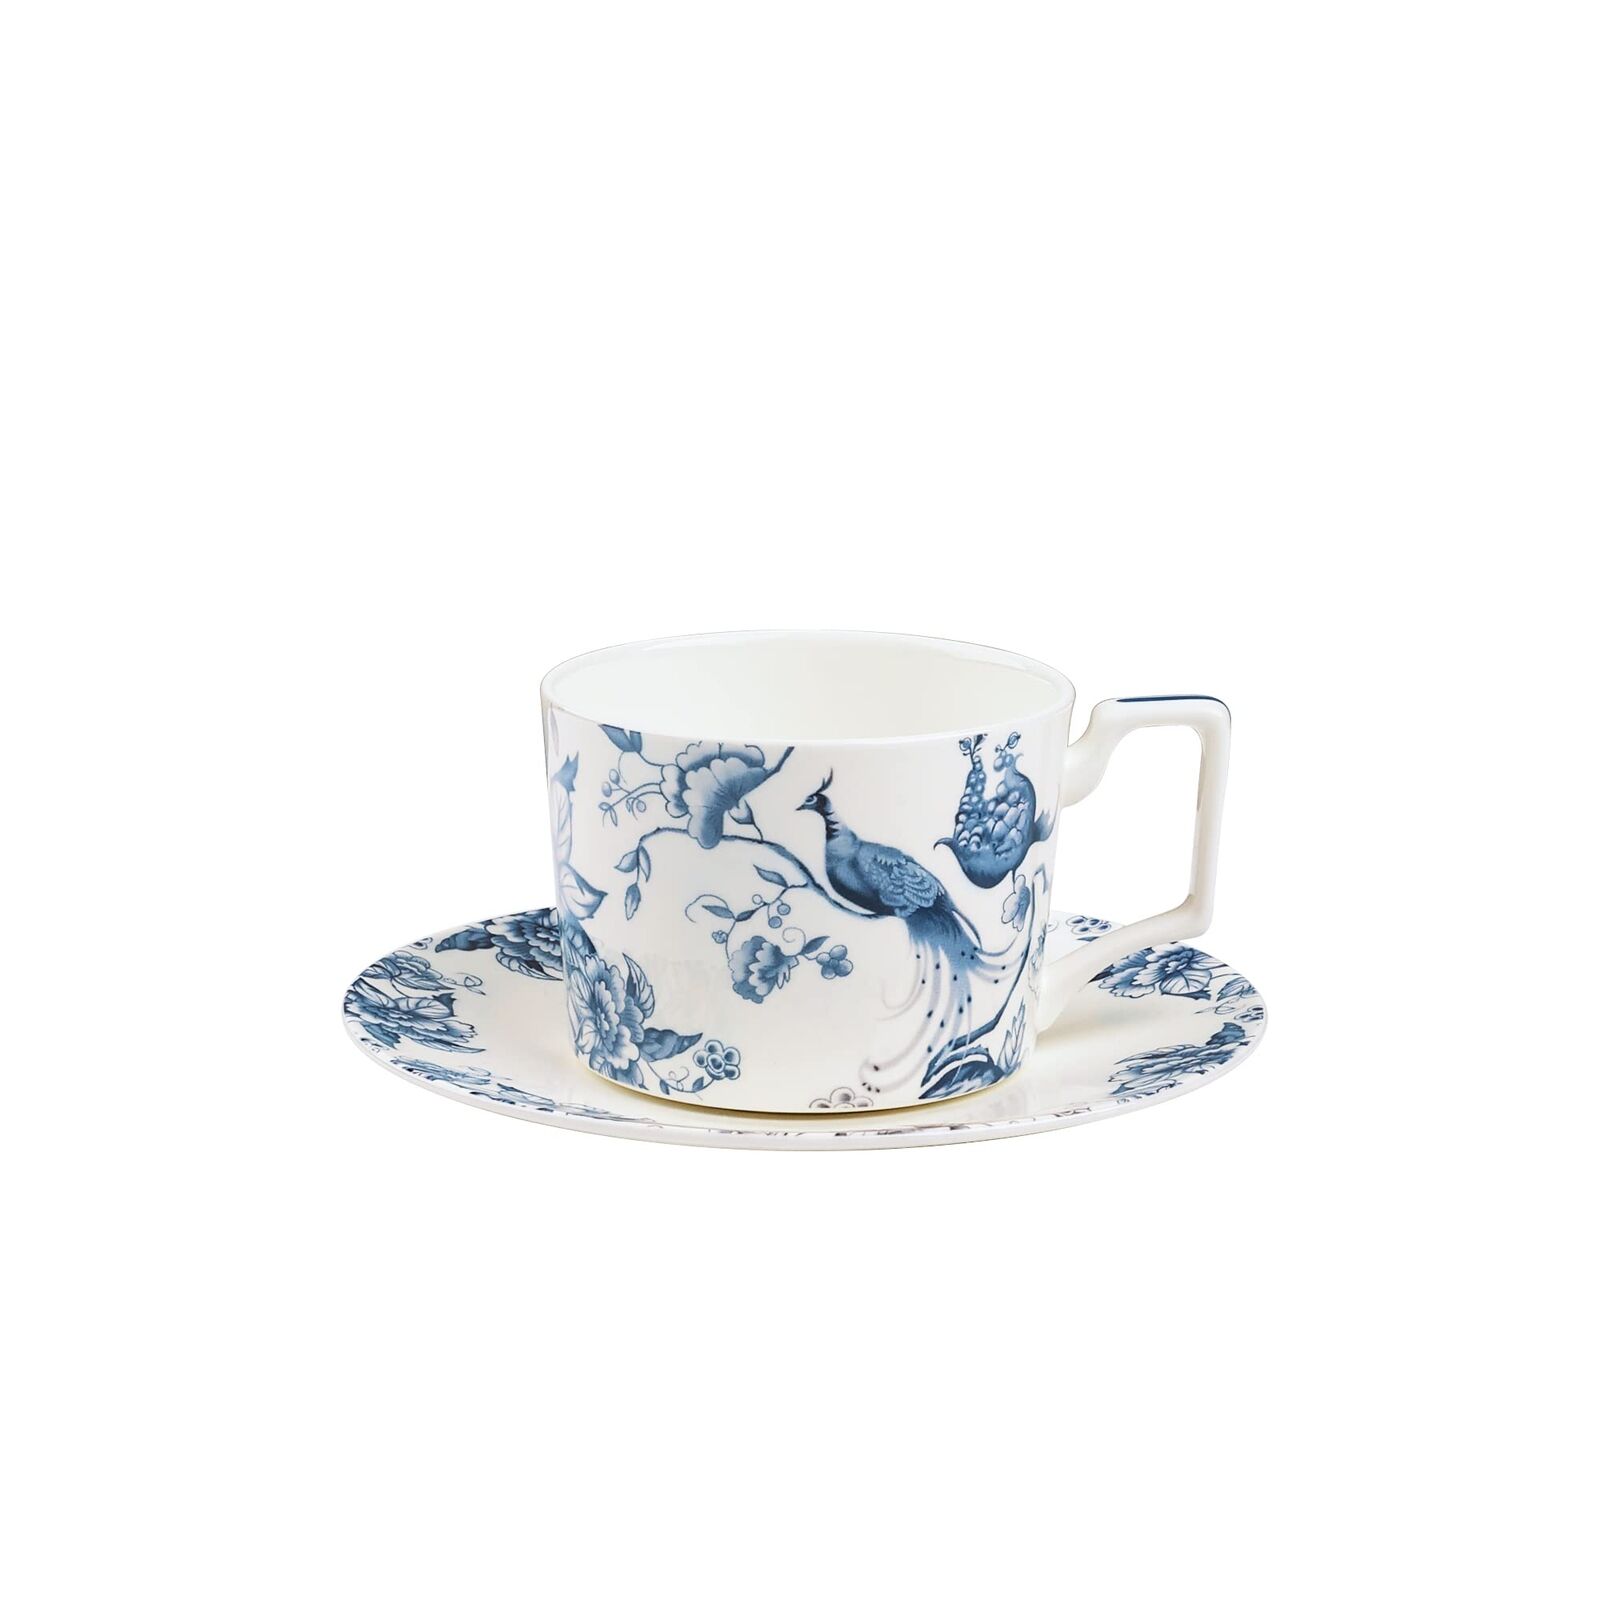 9oz Bone China Tea Cup and Saucer Set for 1, Blue and White Coffee Cup with P...